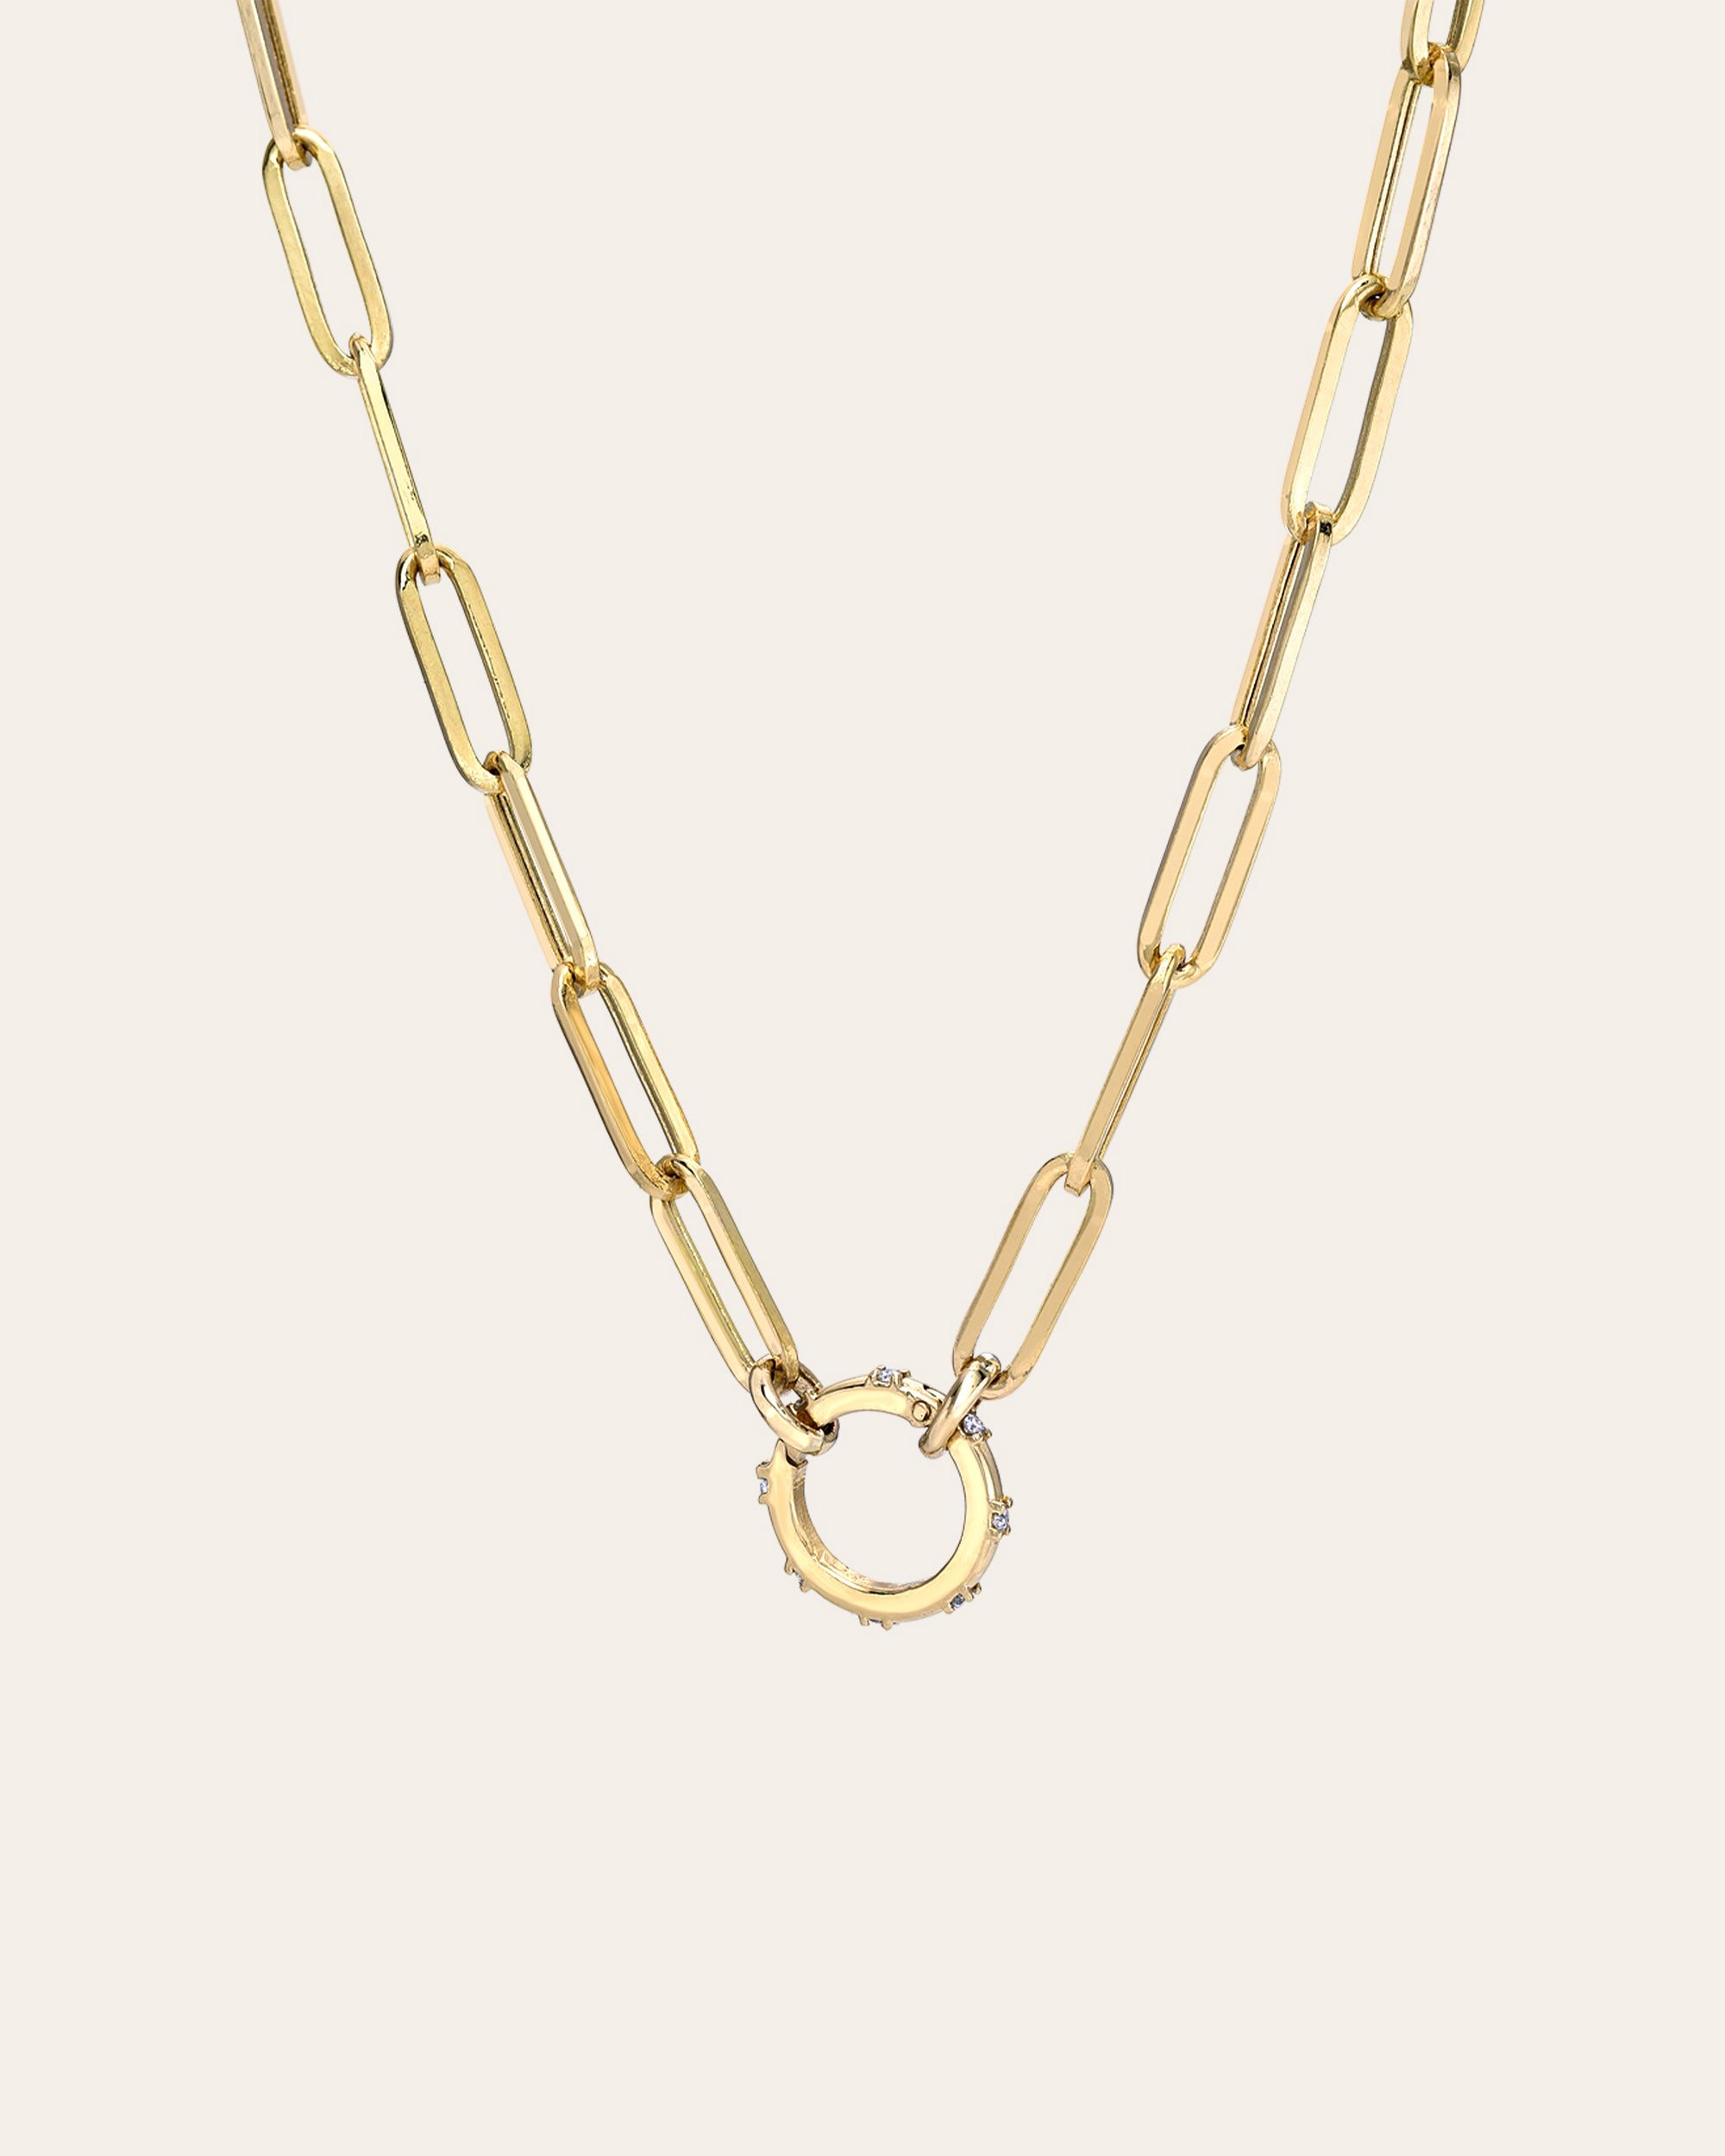 Bujukan Carabiner Lock Necklace with Hollow Paperclip Chain in 14k Yel -  JusticeJewelers